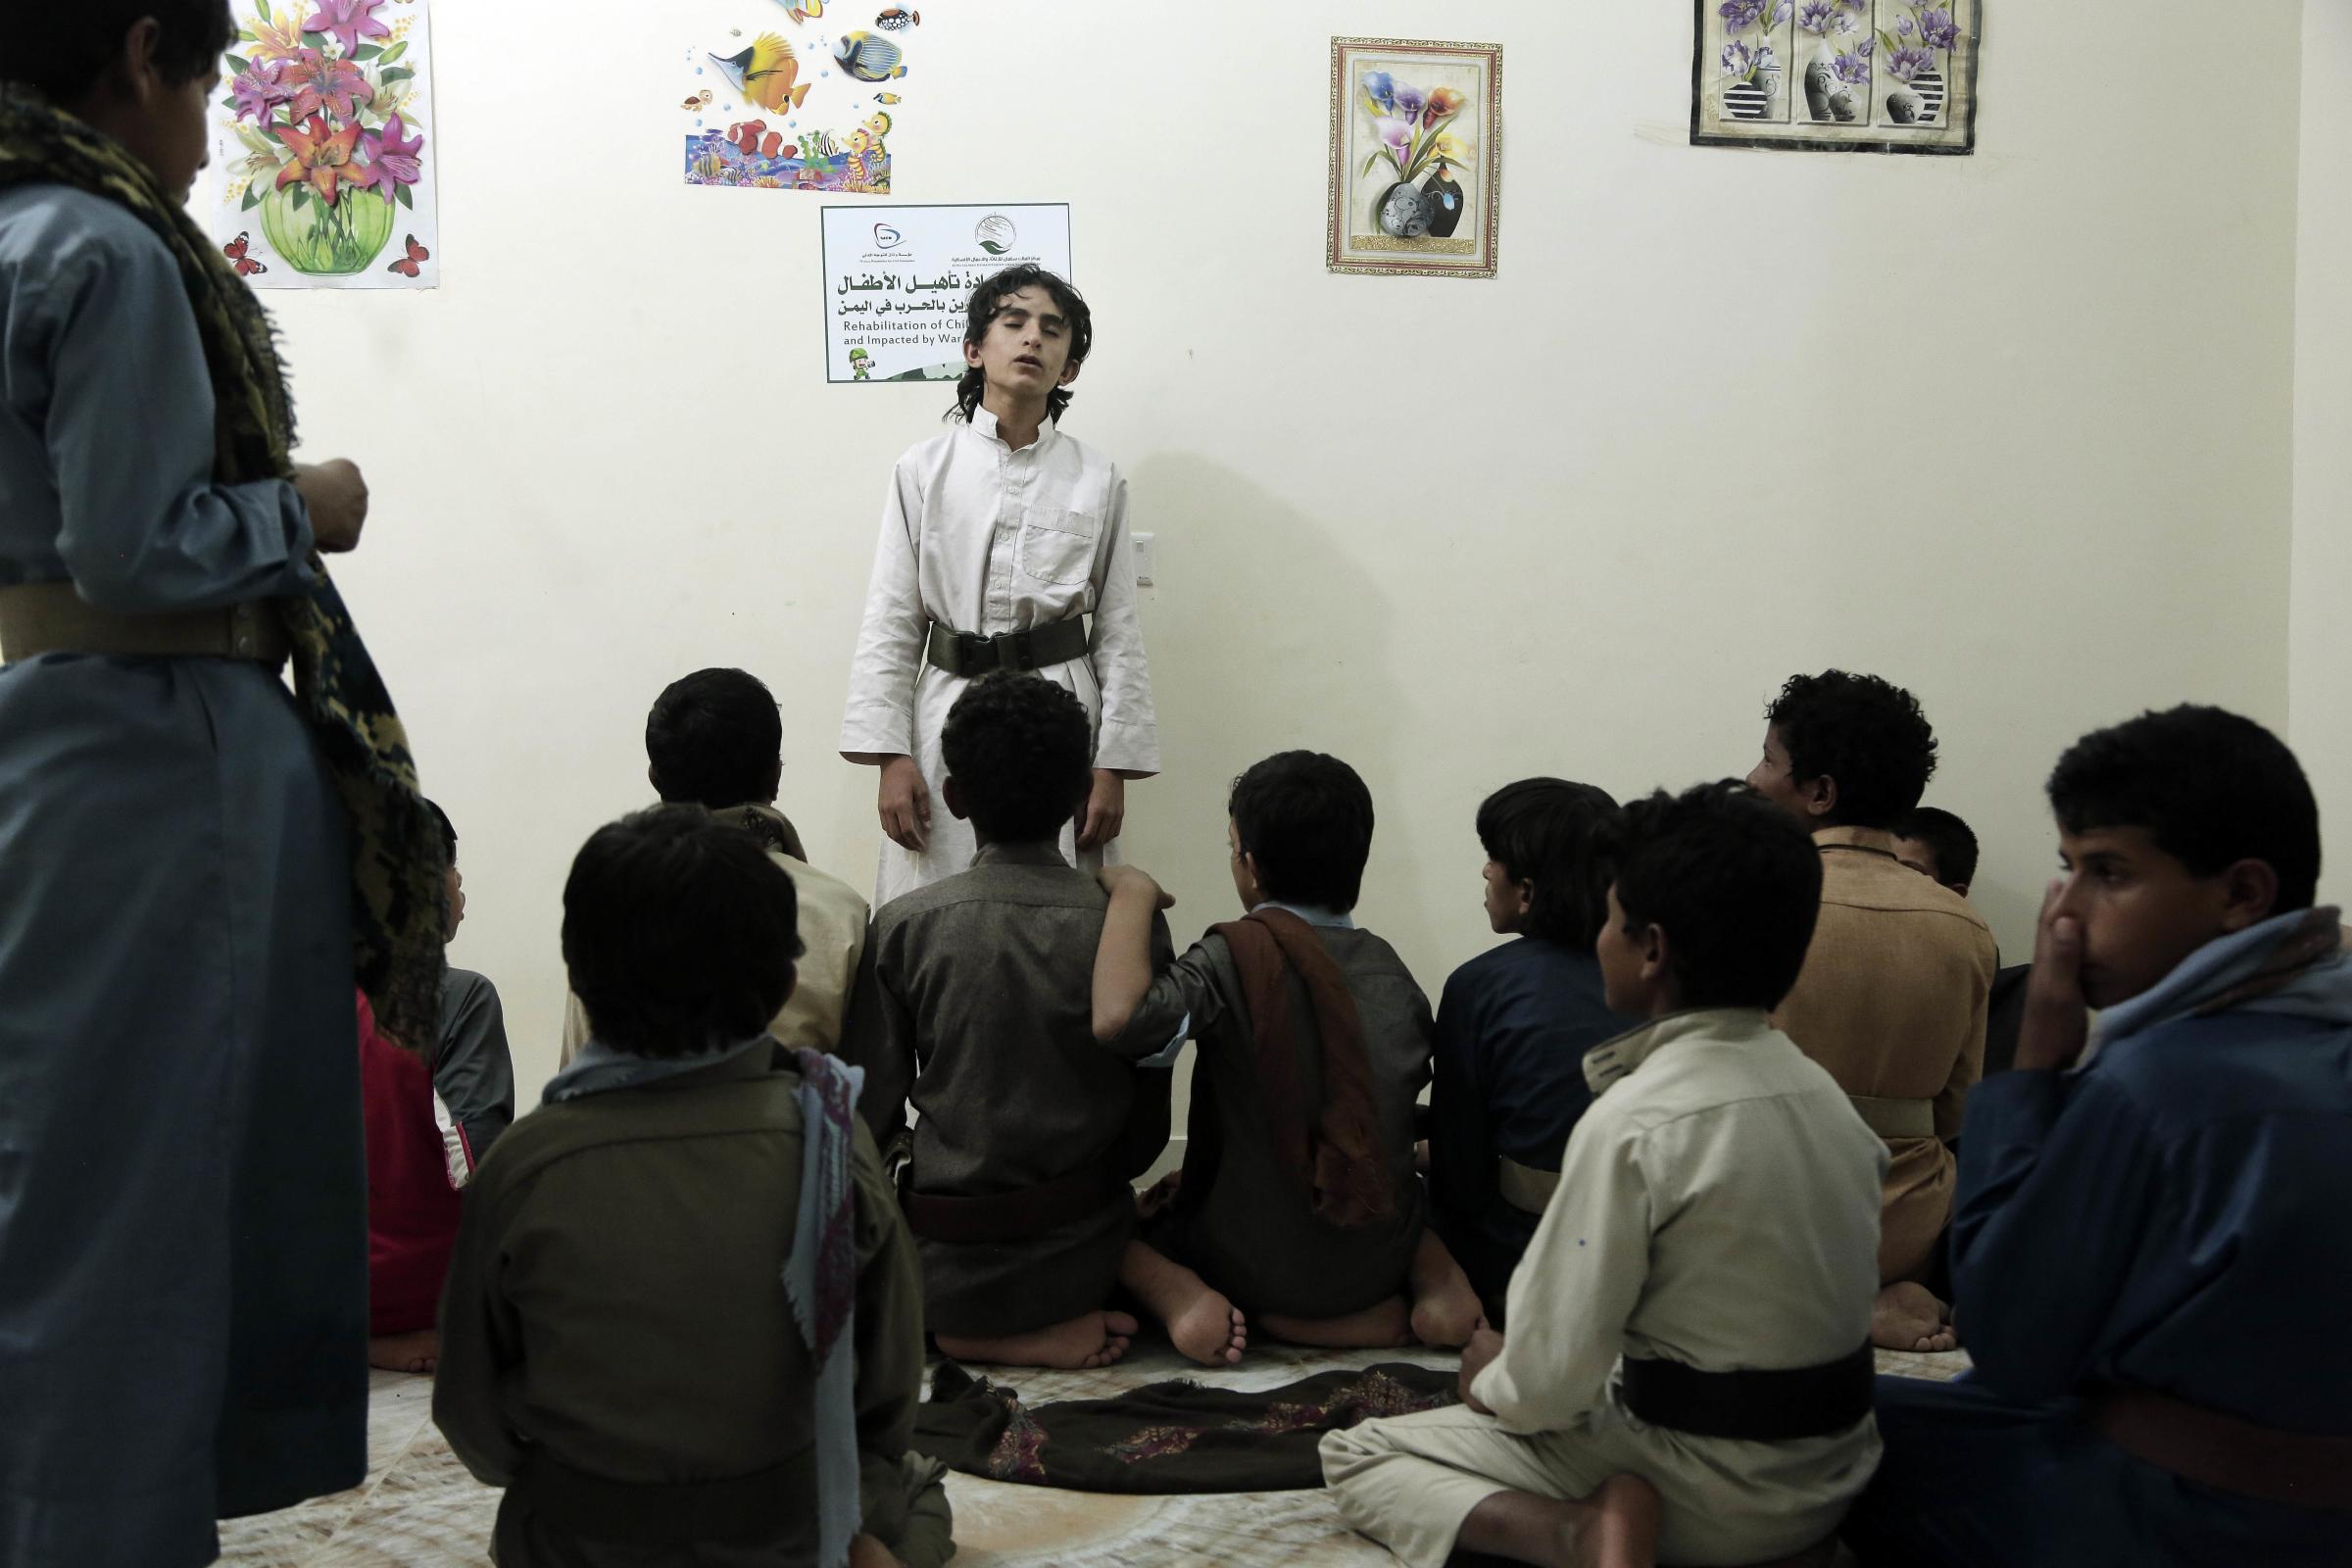 Boys recite poems at the rehabilitation center for former child soldiers in Marib.